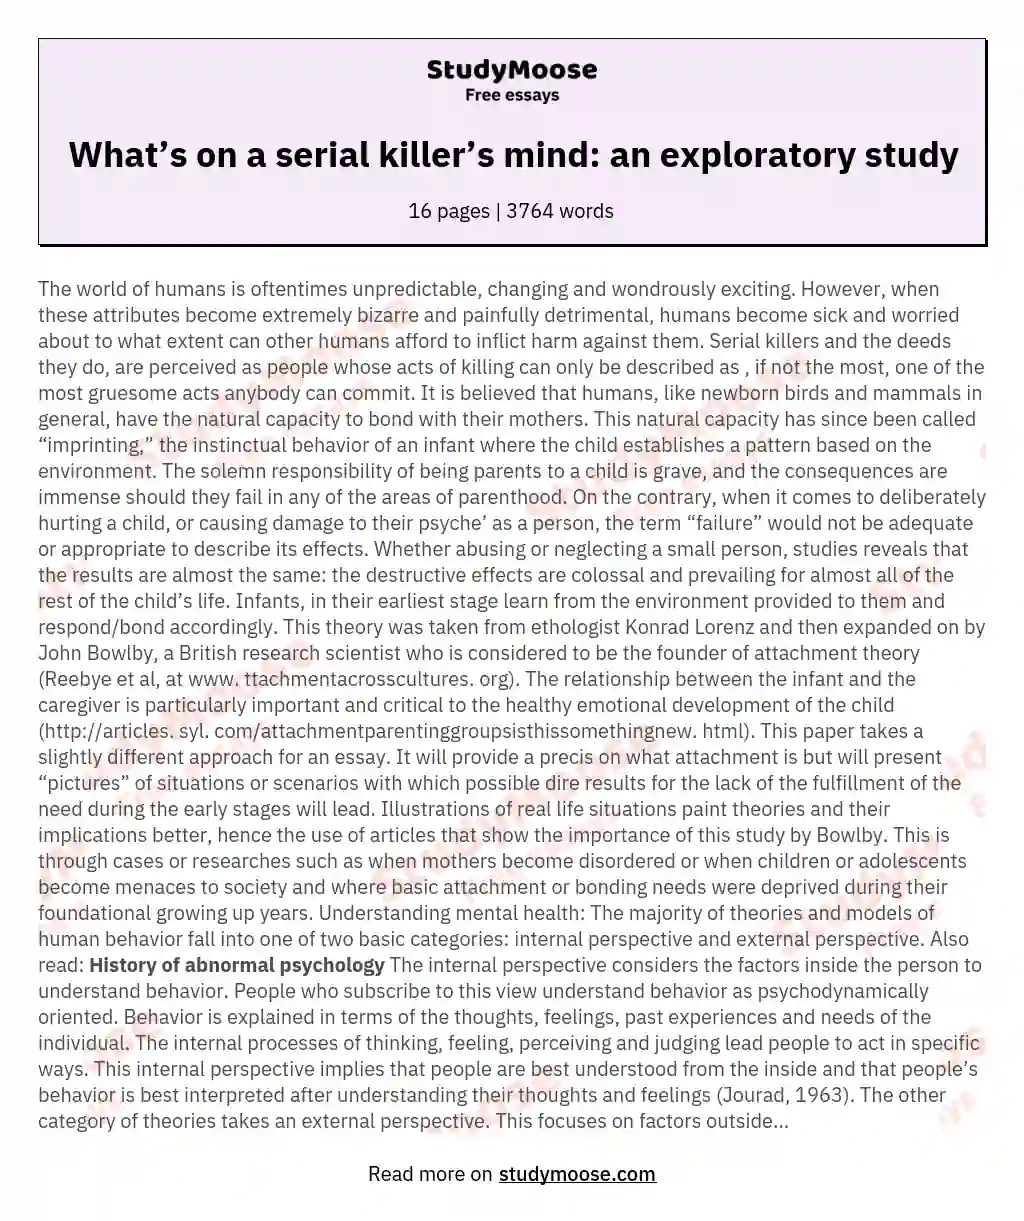 What’s on a serial killer’s mind: an exploratory study